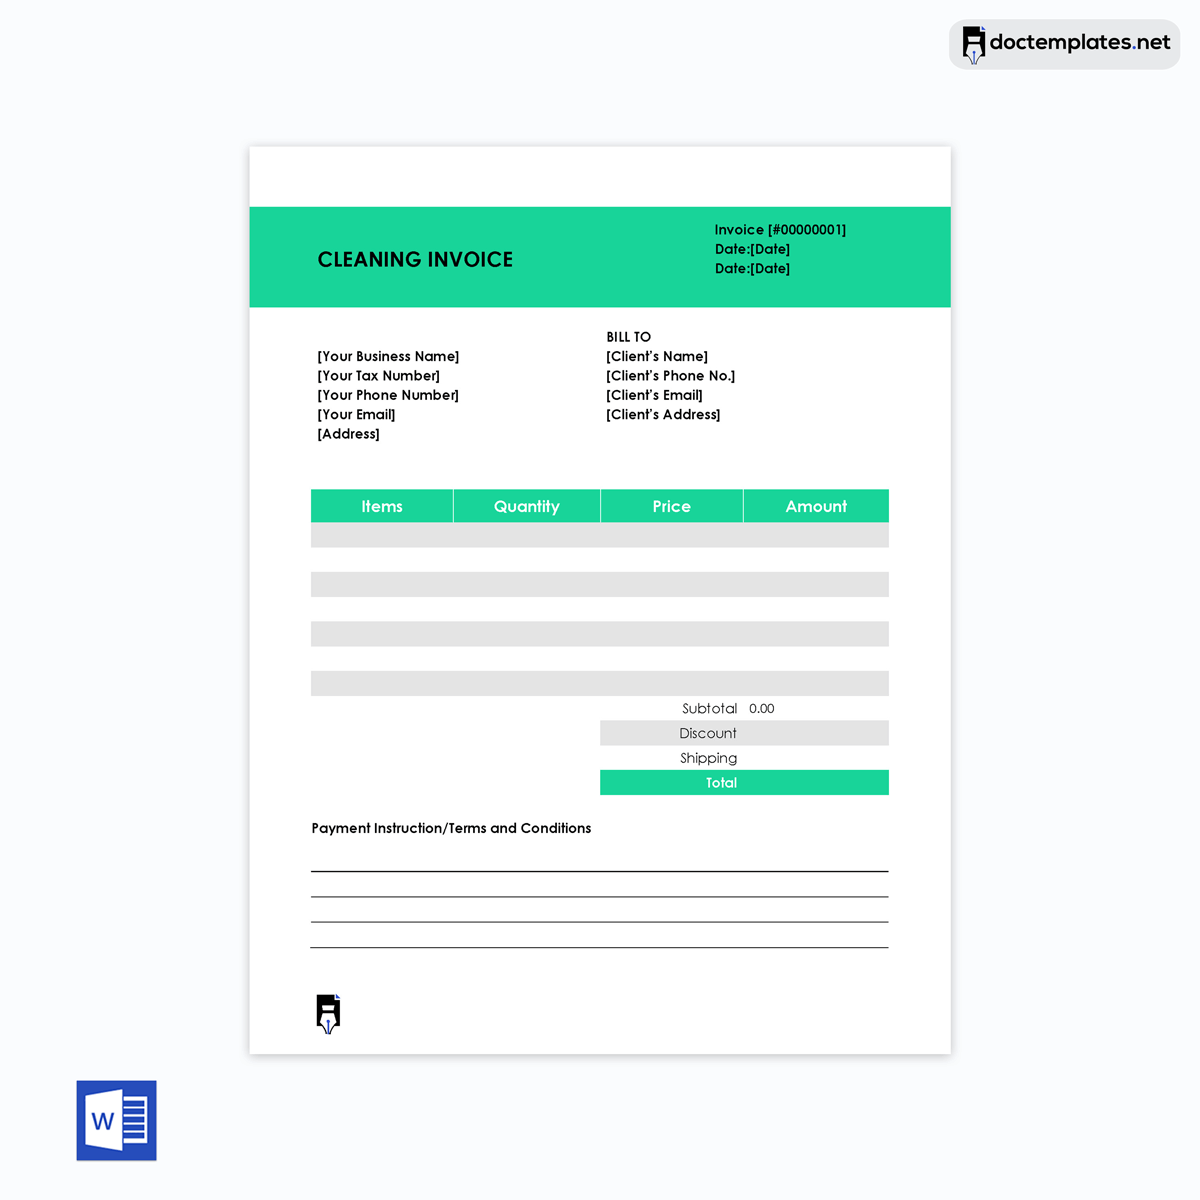 Cleaning invoice example-02 